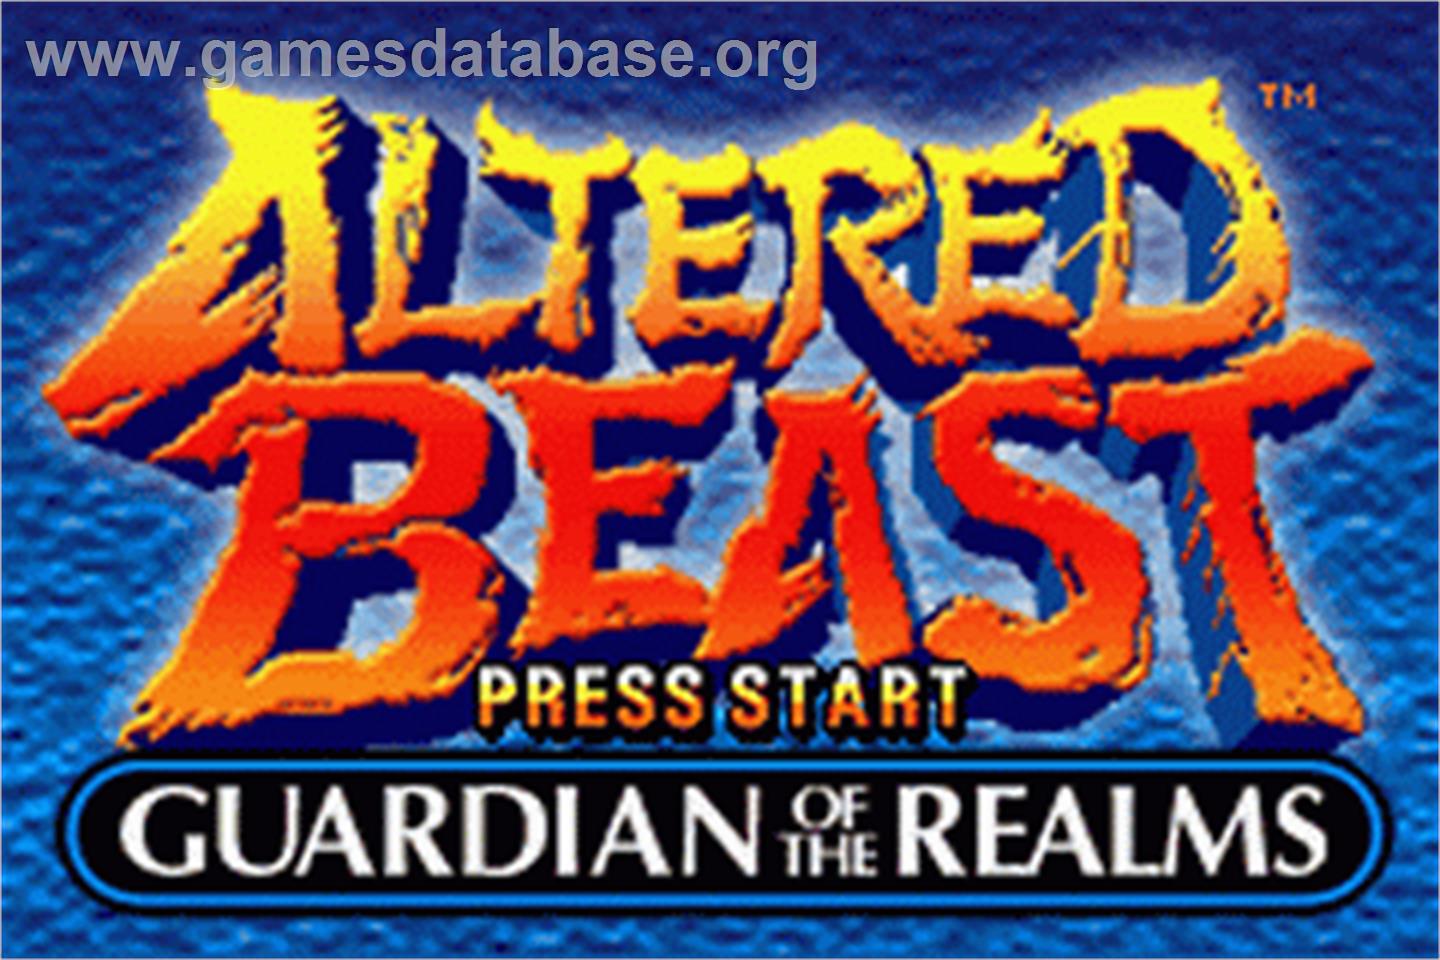 Altered Beast: Guardian of the Realms - Nintendo Game Boy Advance - Artwork - Title Screen